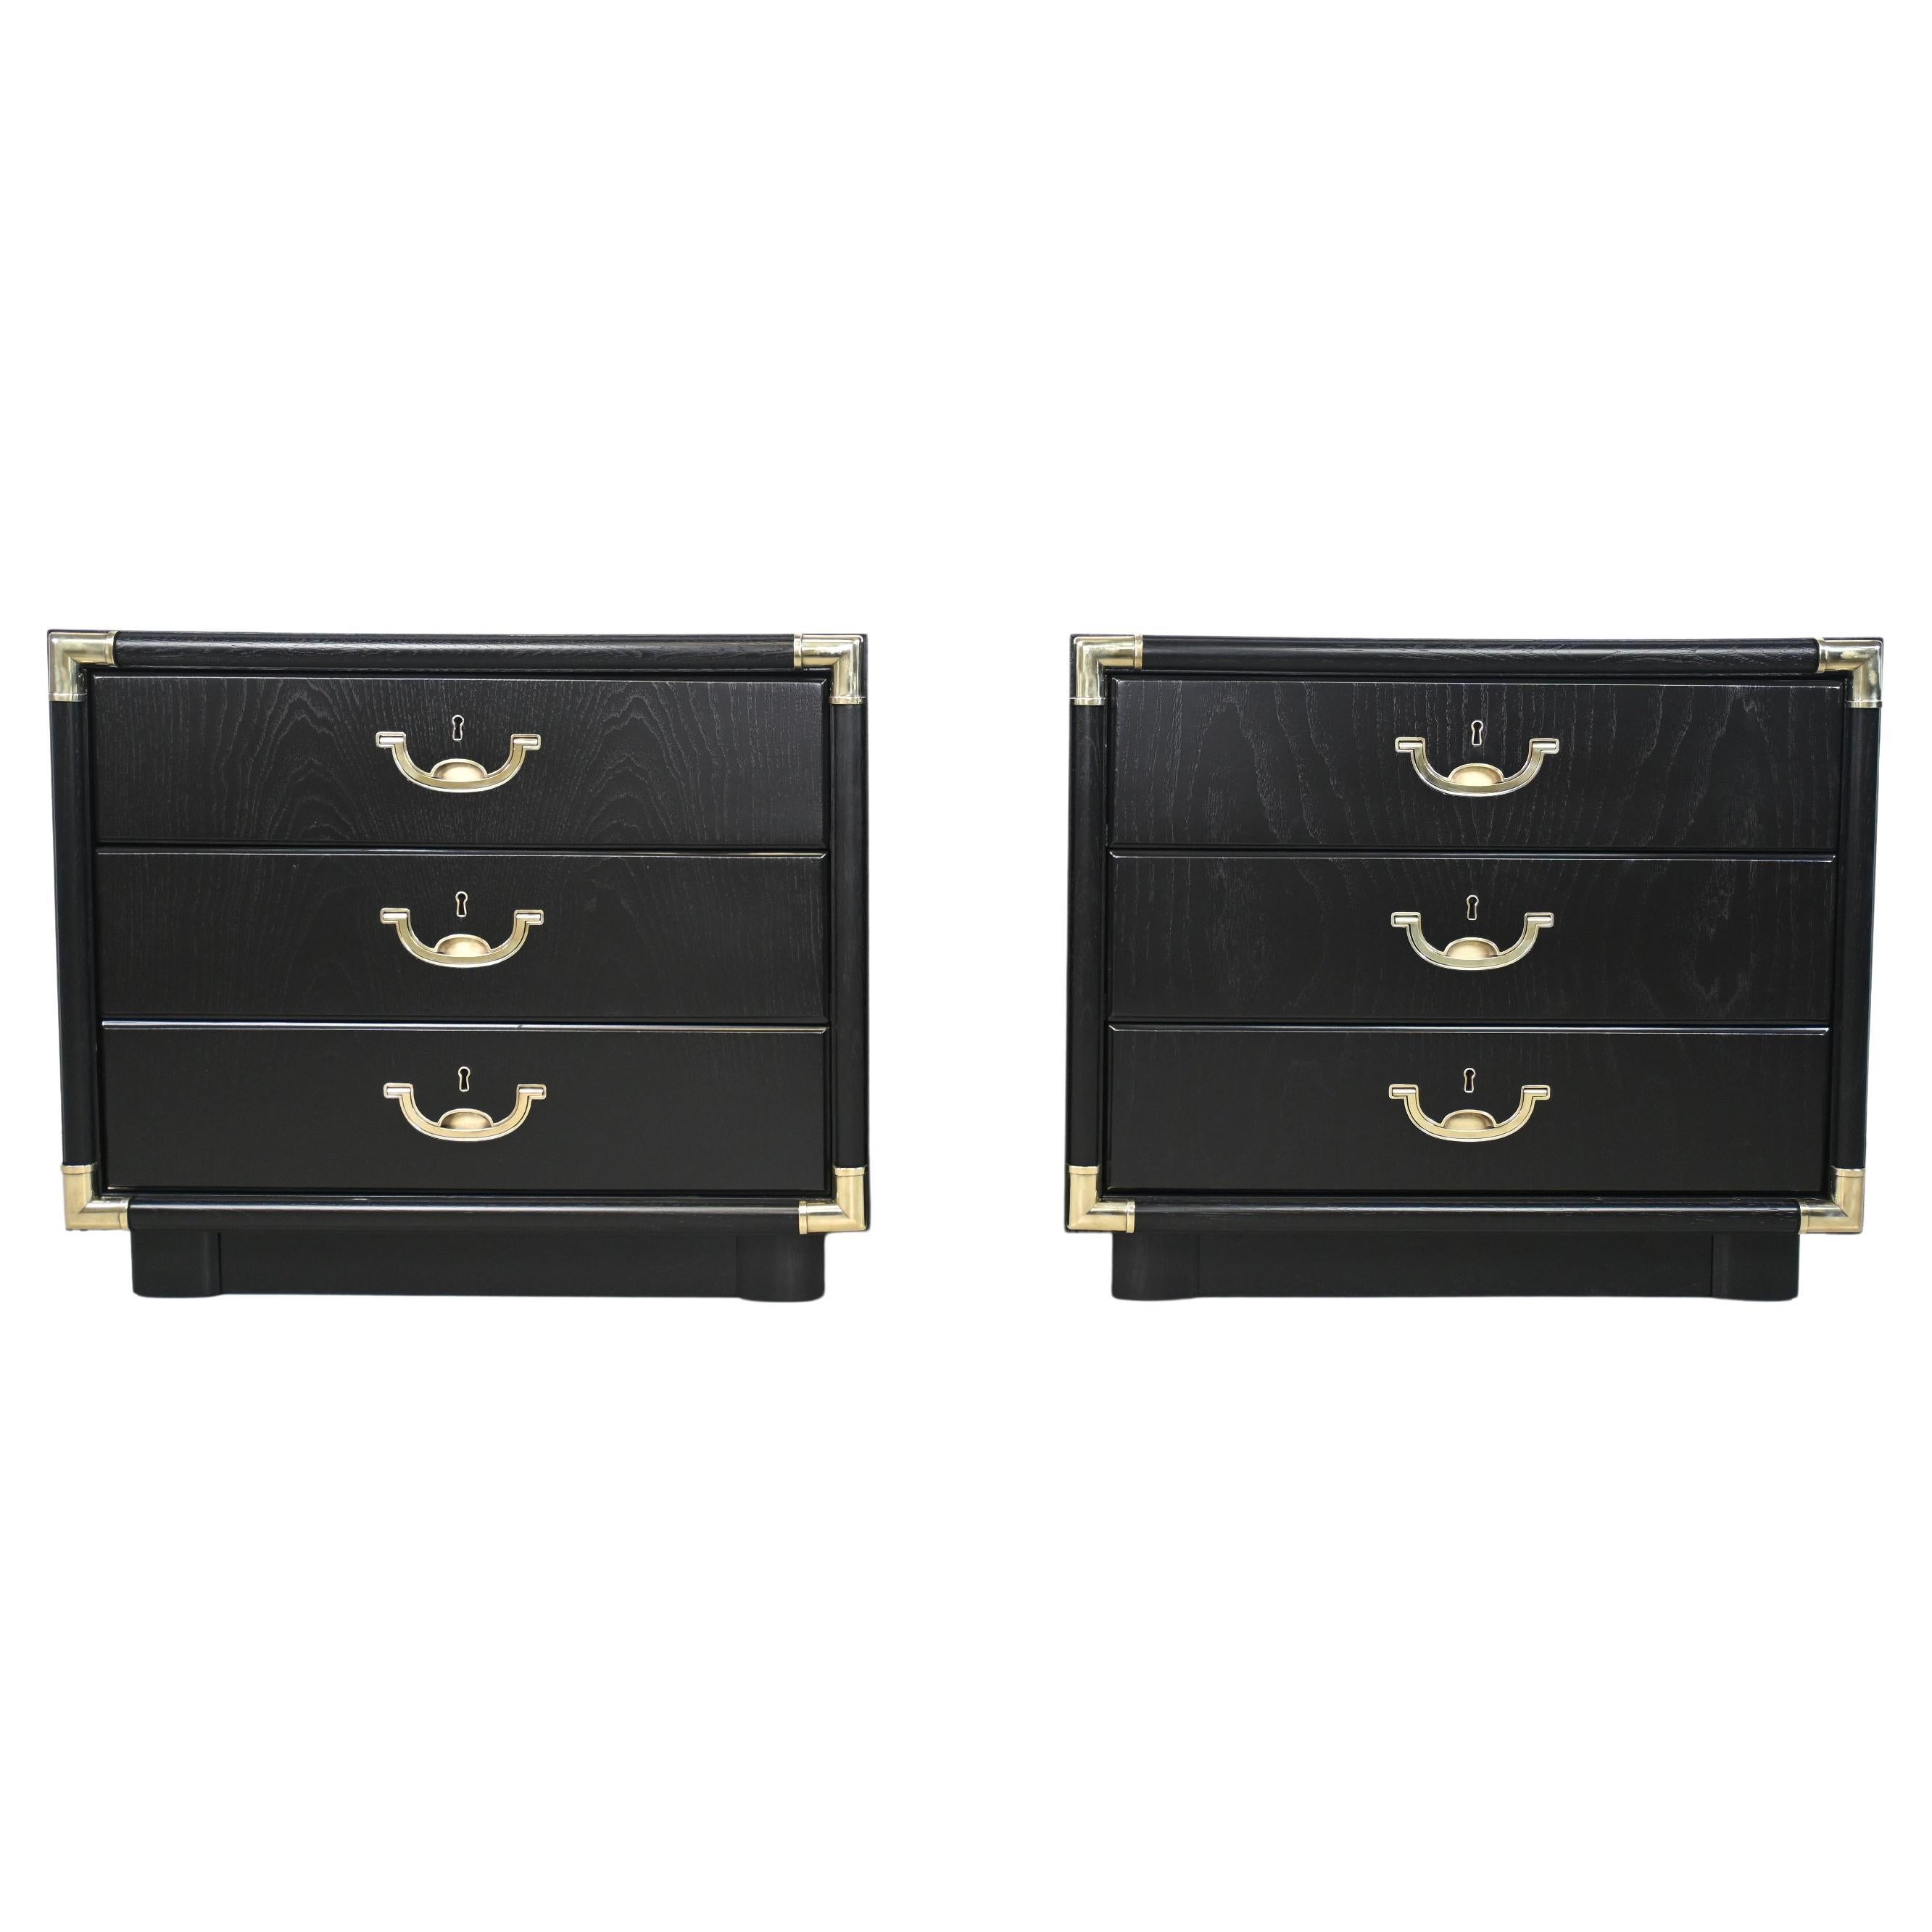 Drexel Accolade Campaign Style Black Lacquered Nightstands - a Pair For Sale